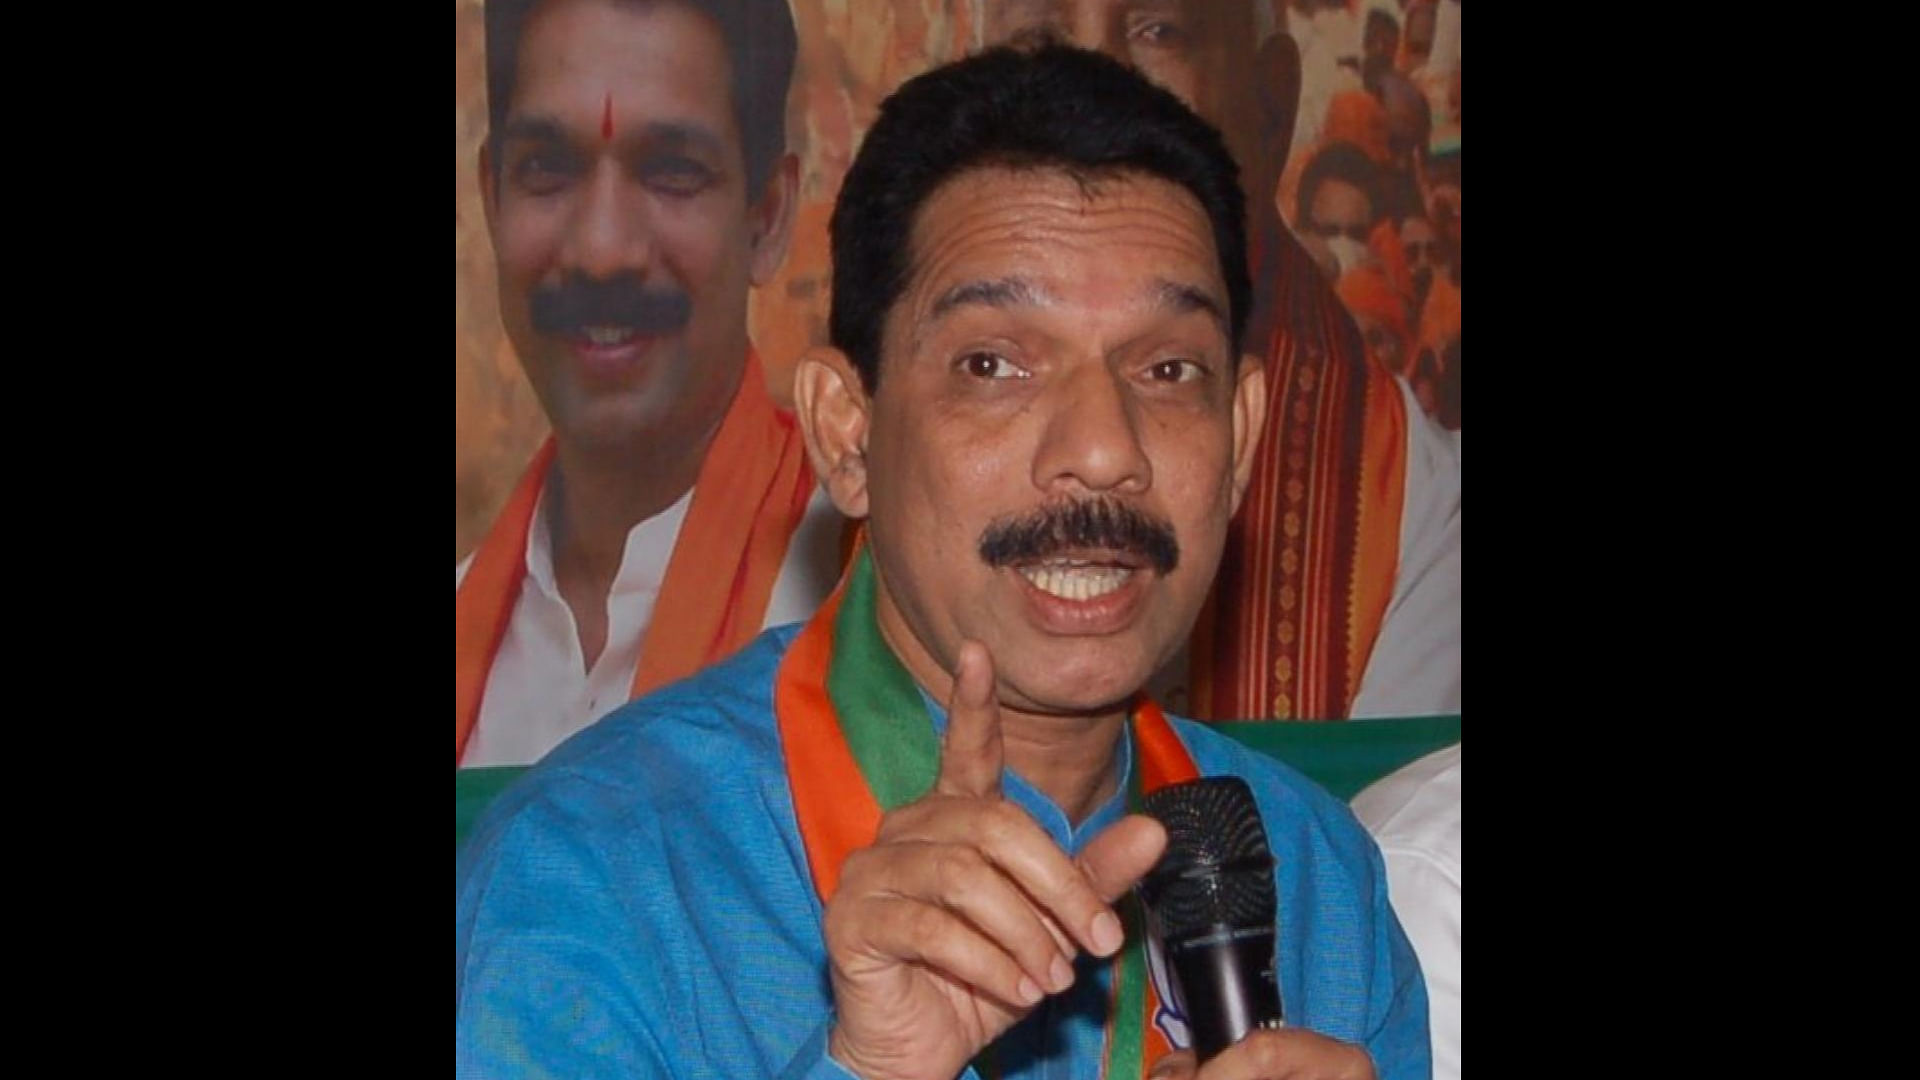 "Earlier, he tried to demoralise the Mangaluru police by accusing them of being responsible for the Mangaluru violence. Now, he is trying to gain cheap publicity by claiming that there is threat to his life," Kateel said. (DH File Photo)